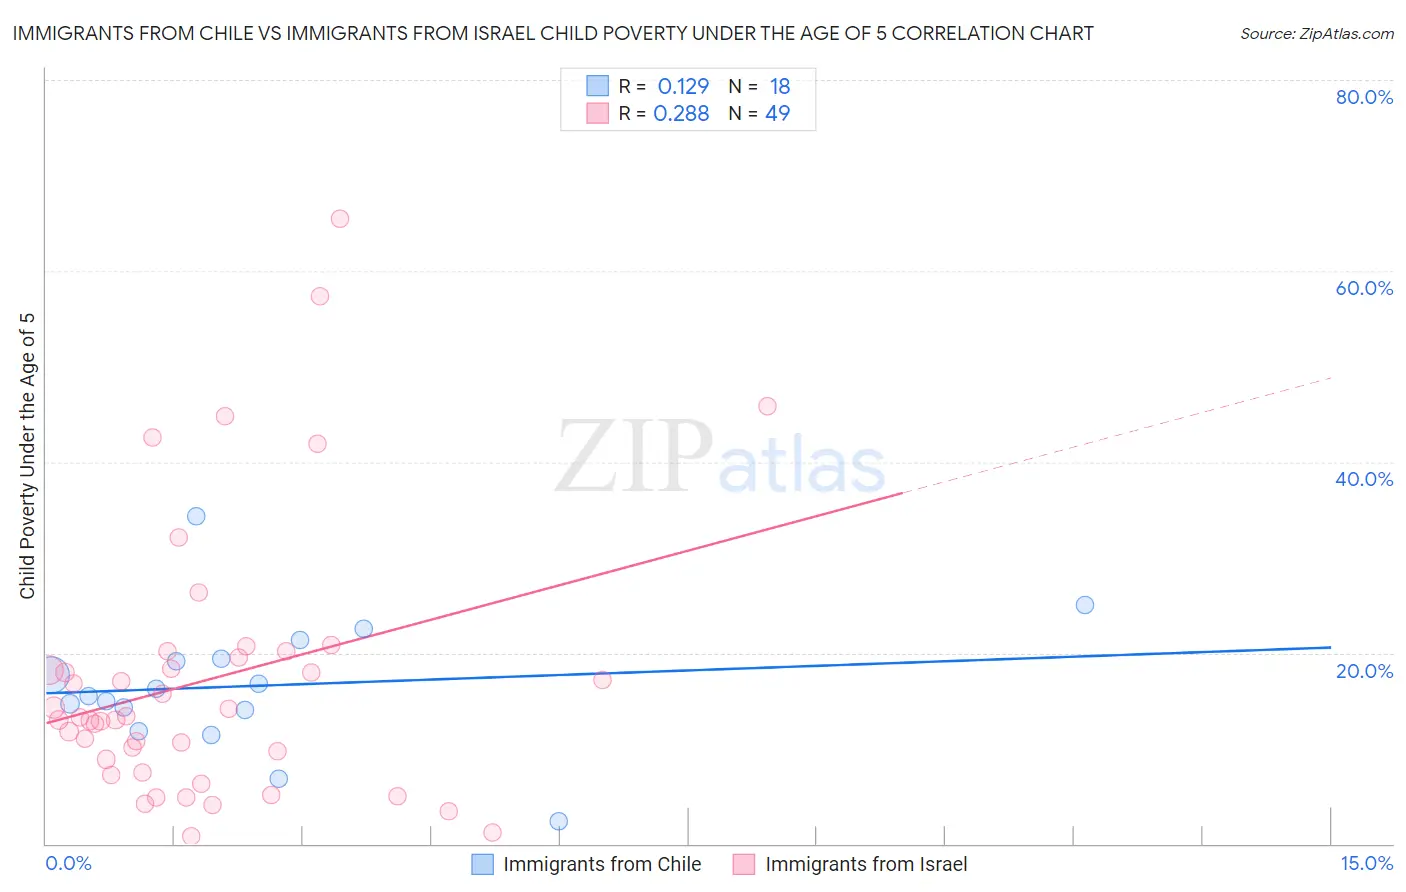 Immigrants from Chile vs Immigrants from Israel Child Poverty Under the Age of 5